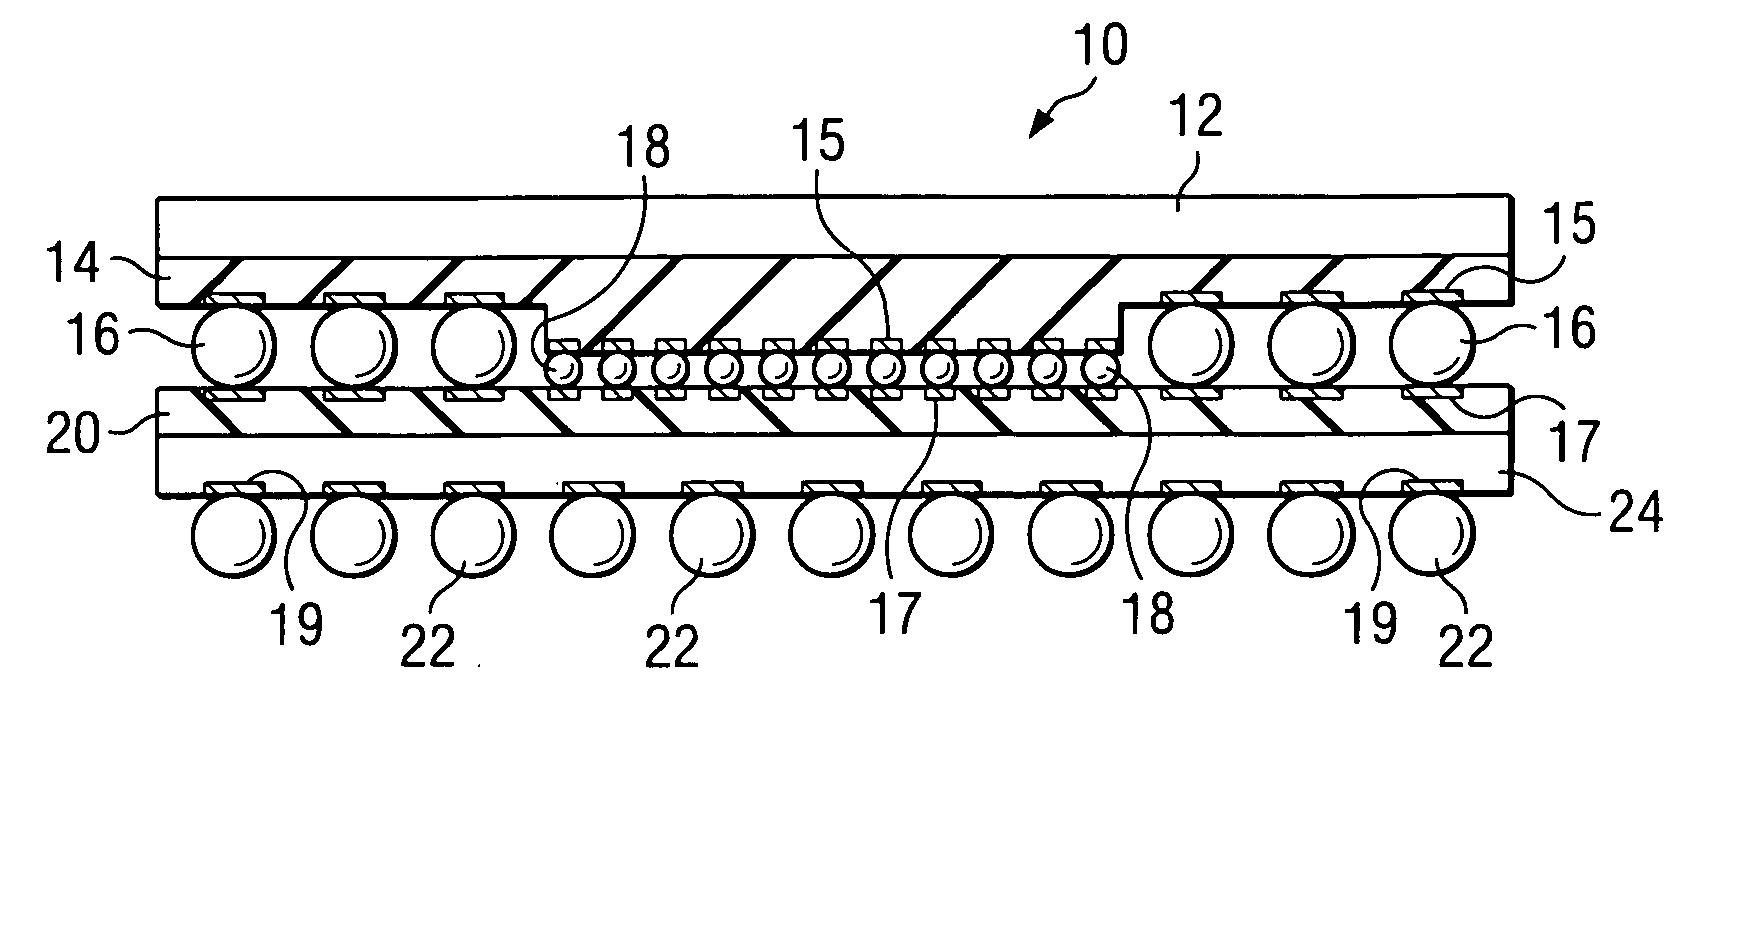 Semiconductor circuit with multiple contact sizes